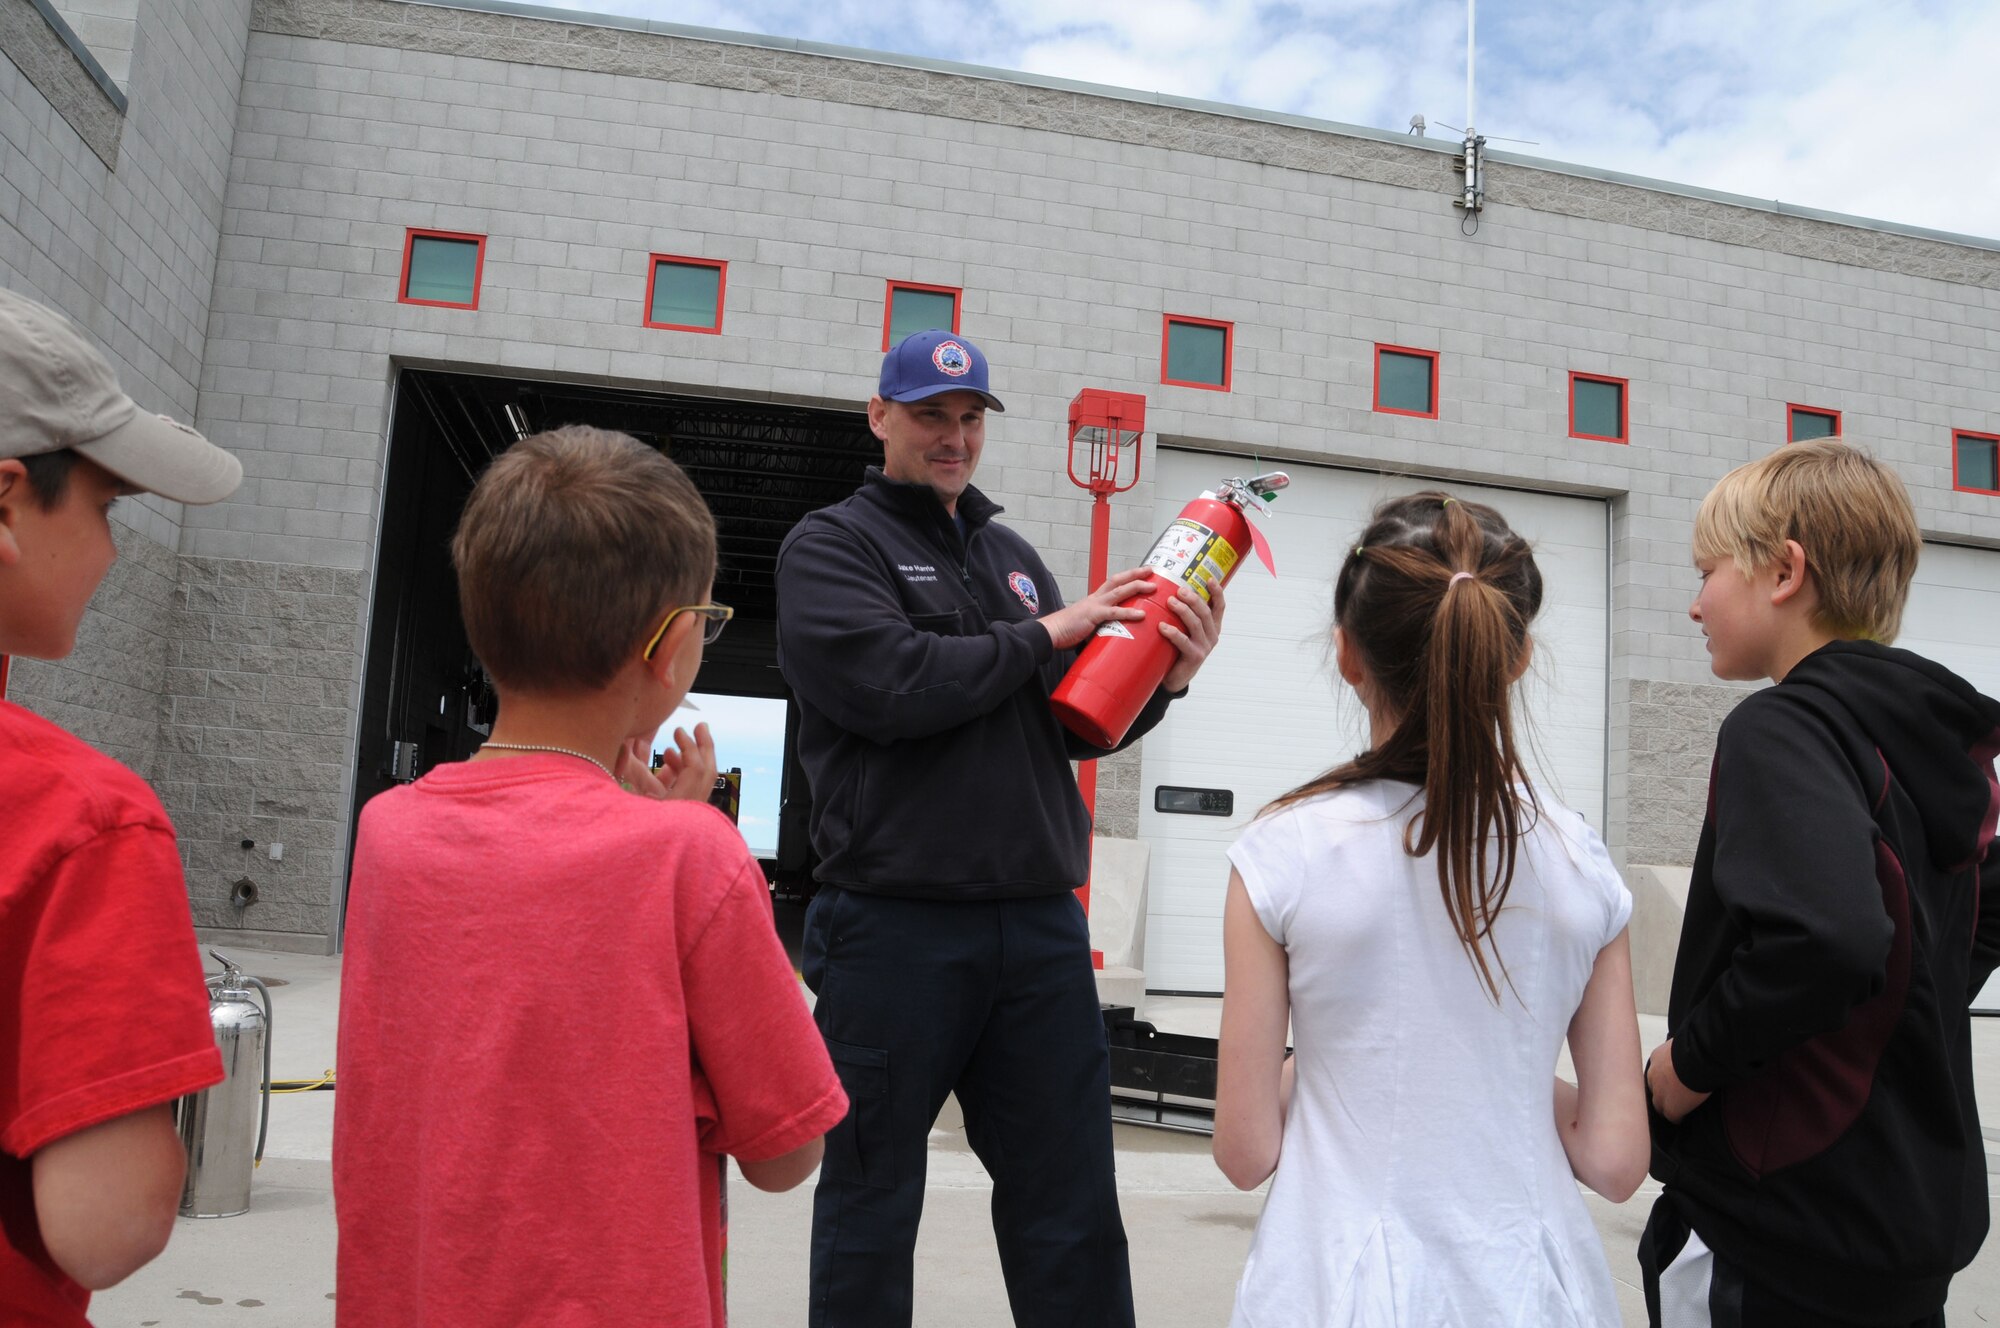 Montana Air National Guard Fire Department Lt. Jacob Harris demonstrates how to operate a fire extinguisher during a STARBASE tour of the station June 15, 2016. (U.S. Air National Guard photo/Senior Master Sgt. Eric Peterson)